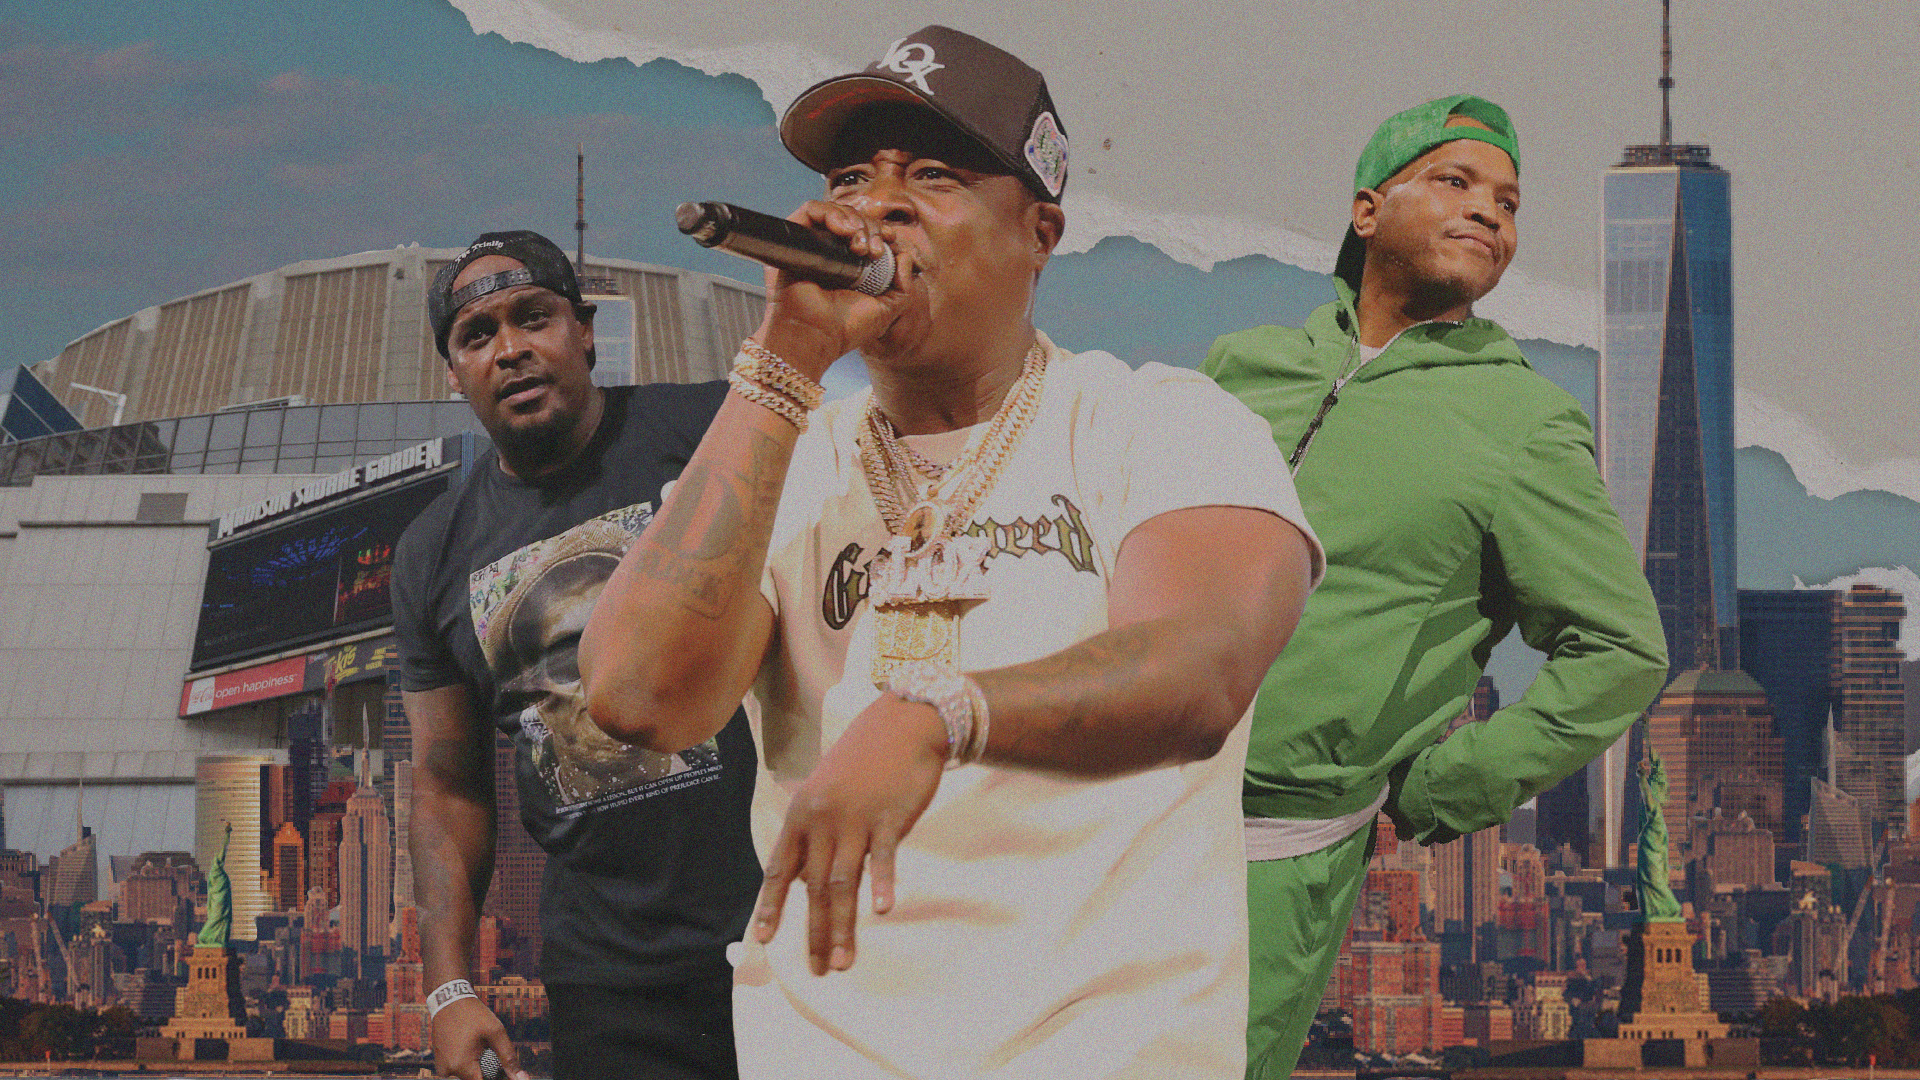 The Lox Vs Dipset at Madison Square Garden on August 03, 2021 in